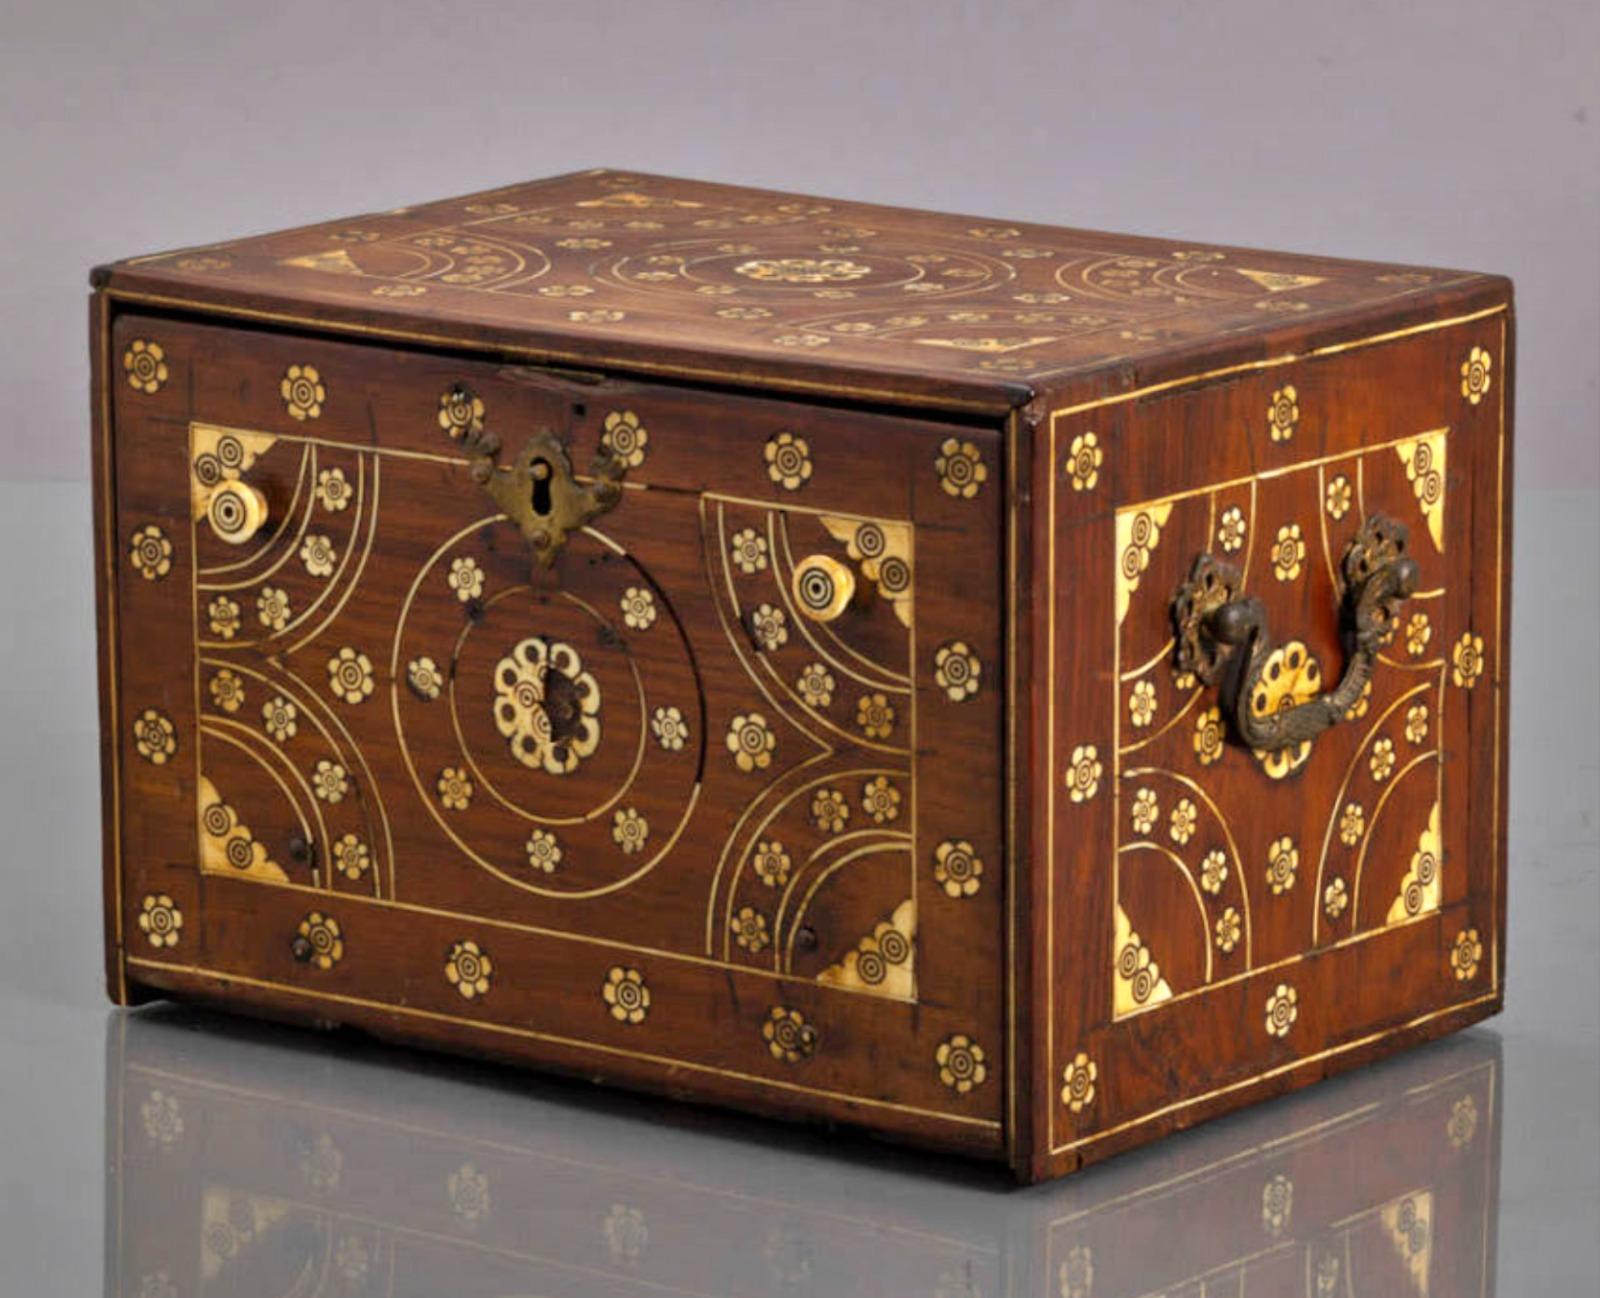 Cabinet/ Counter Indo-Portuguese 17th century
In sissoo, decoration with inlaid 